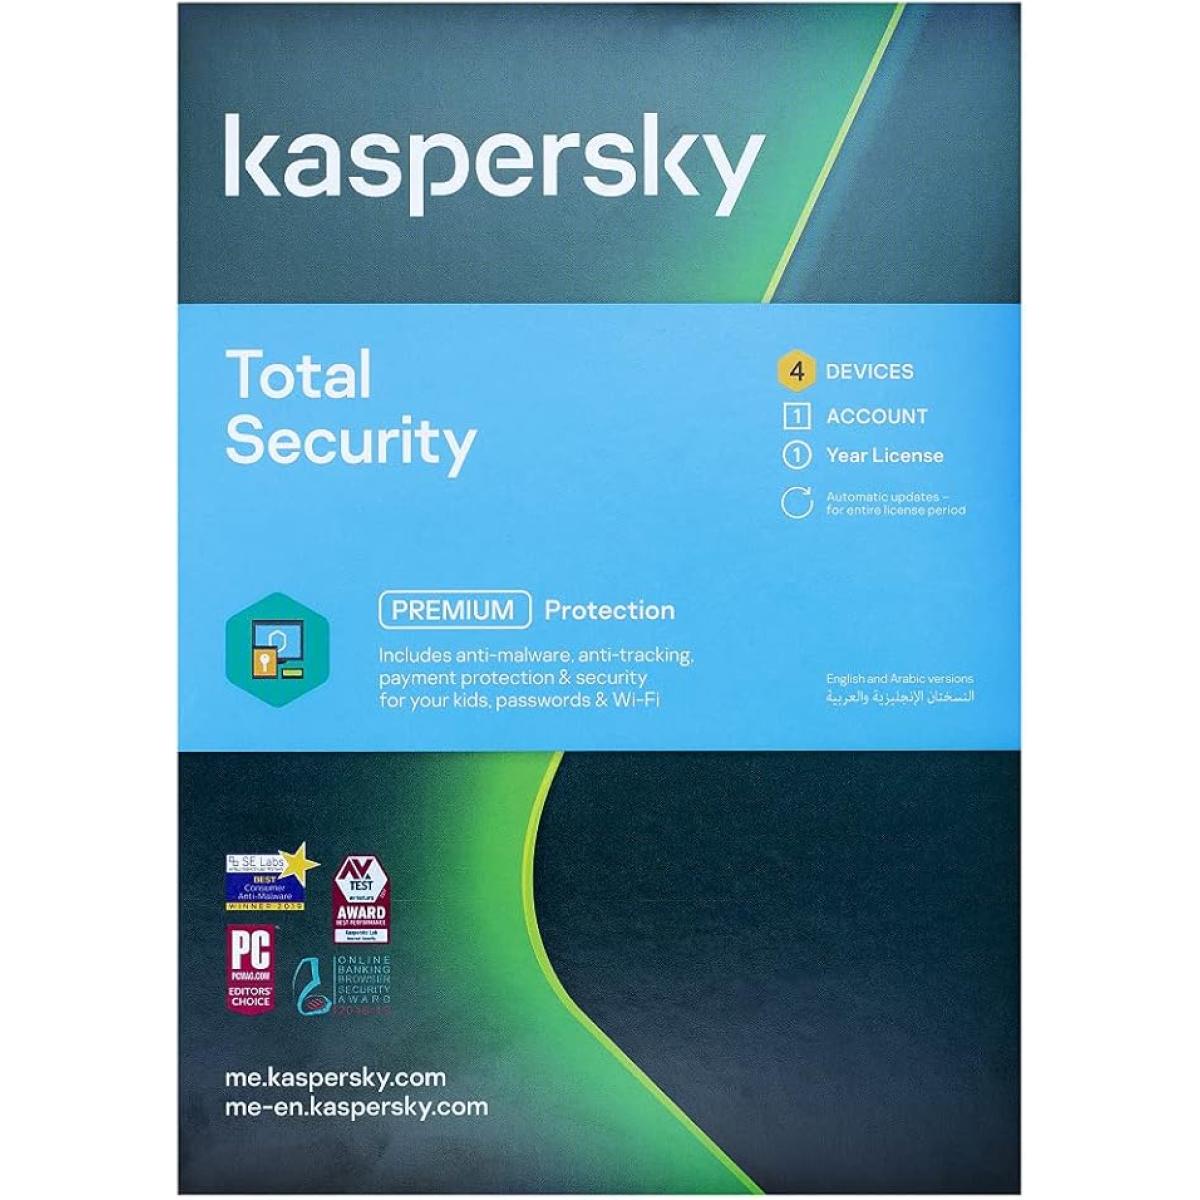 Kaspersky Total Security Premium Protection - 4 Devices